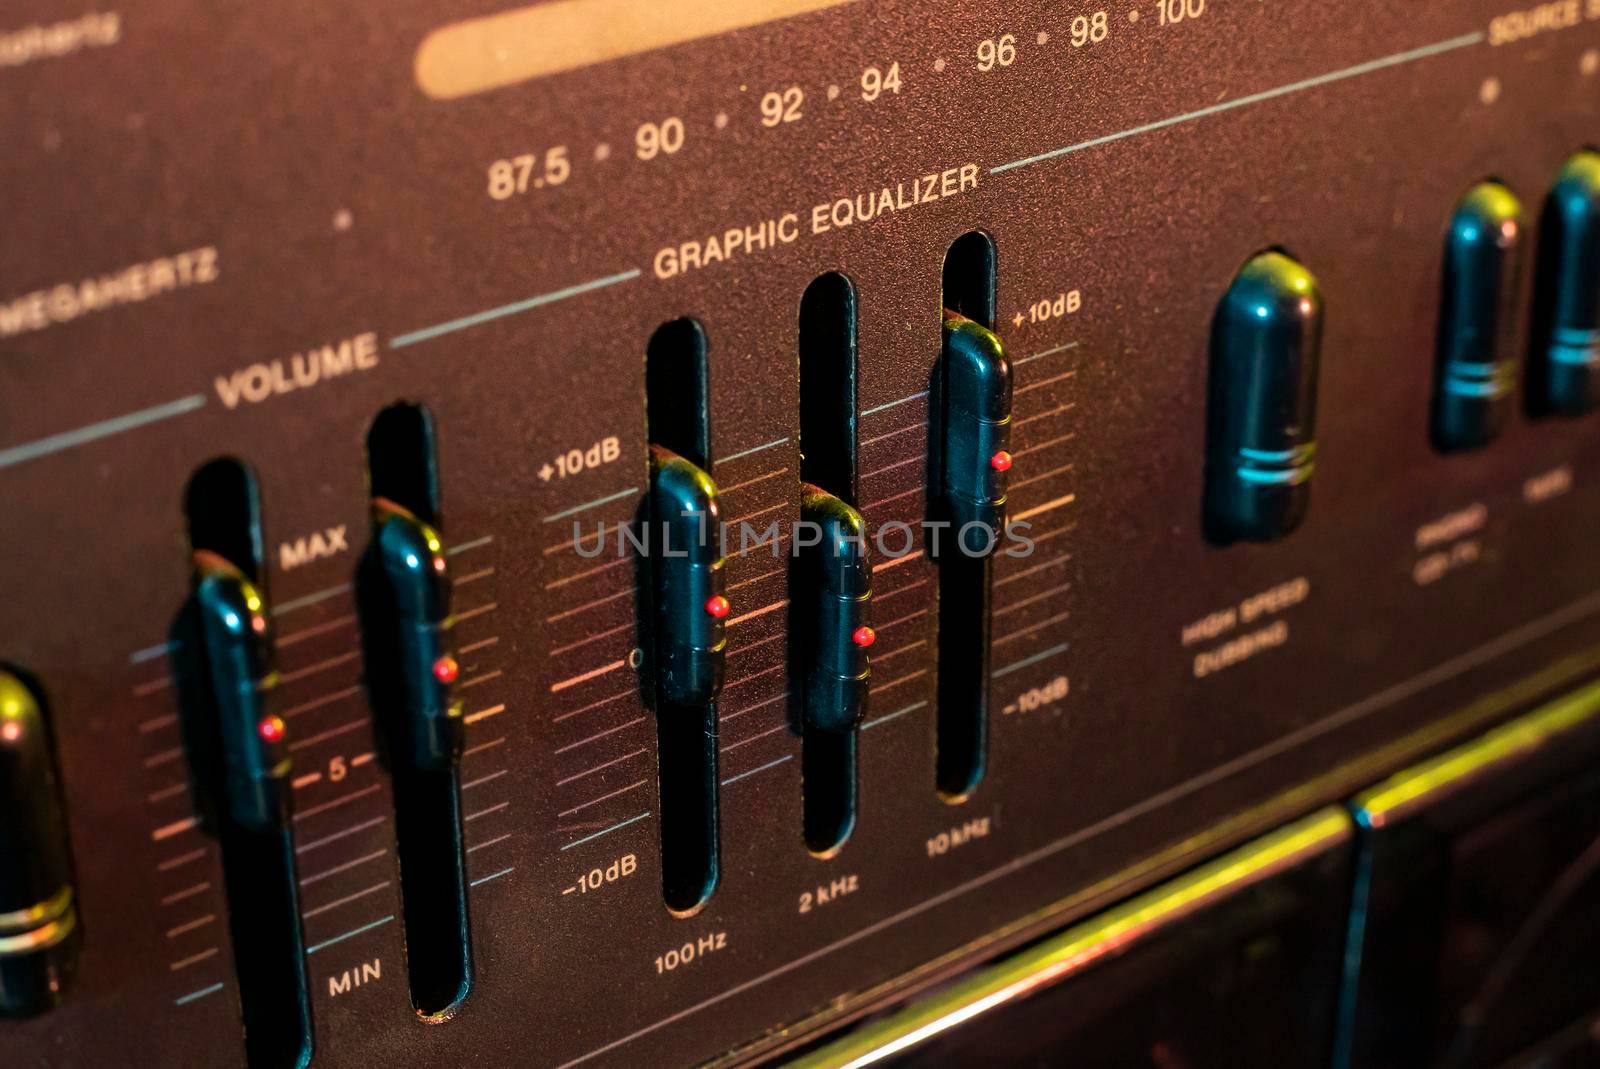 Volume and equalizer controller detail in an old stereo equipment